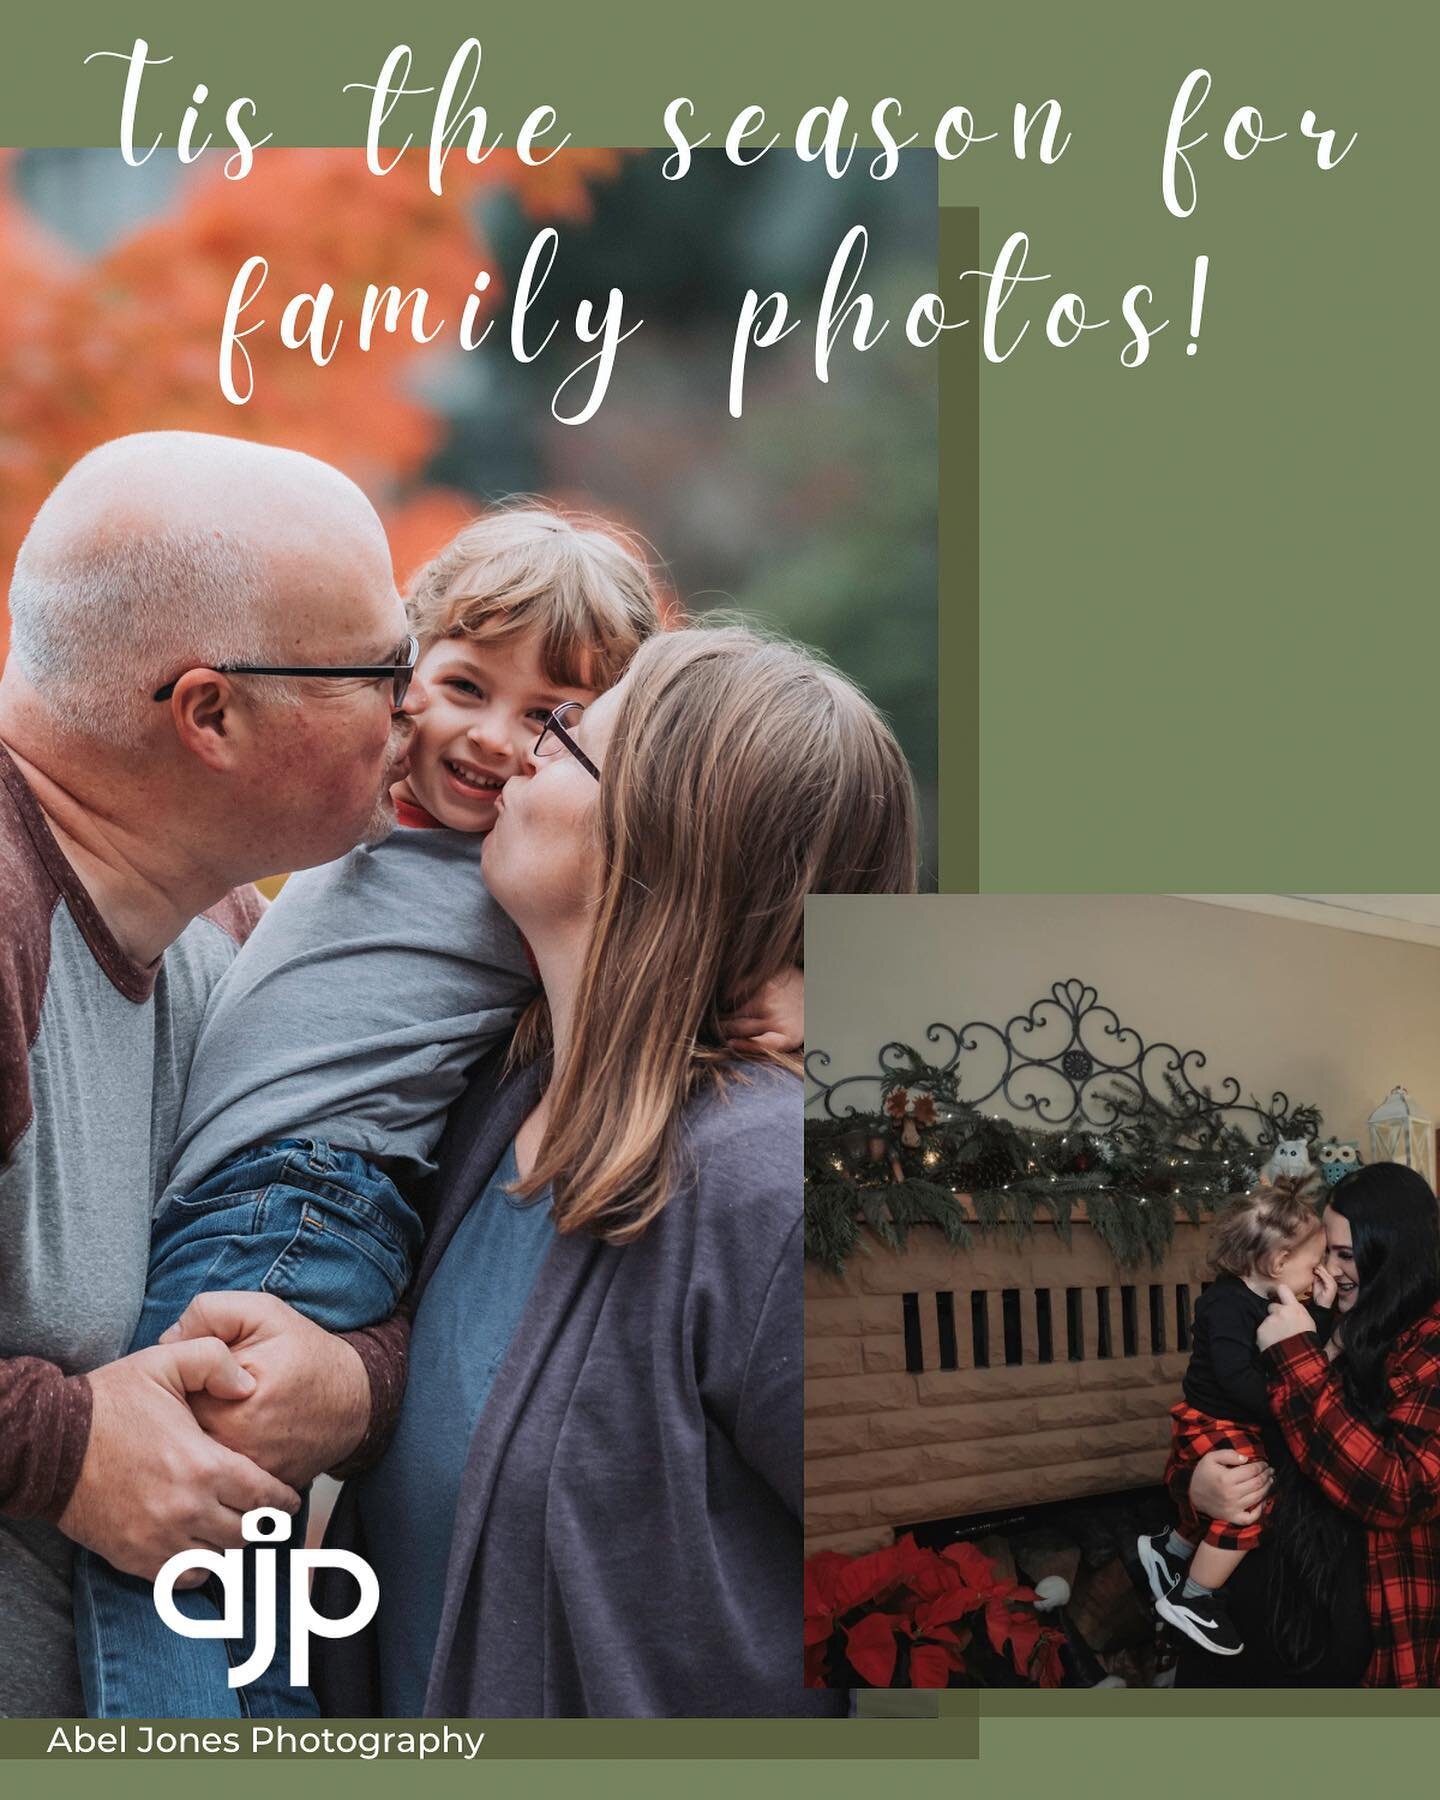 It&rsquo;s that time of year again! 

Get your family photos taken on time for Christmas and Holiday cards!

Contact me to set up a shoot, mini and full sessions available!

#christmas #family #christmascards #familyphotos #familysession #photography